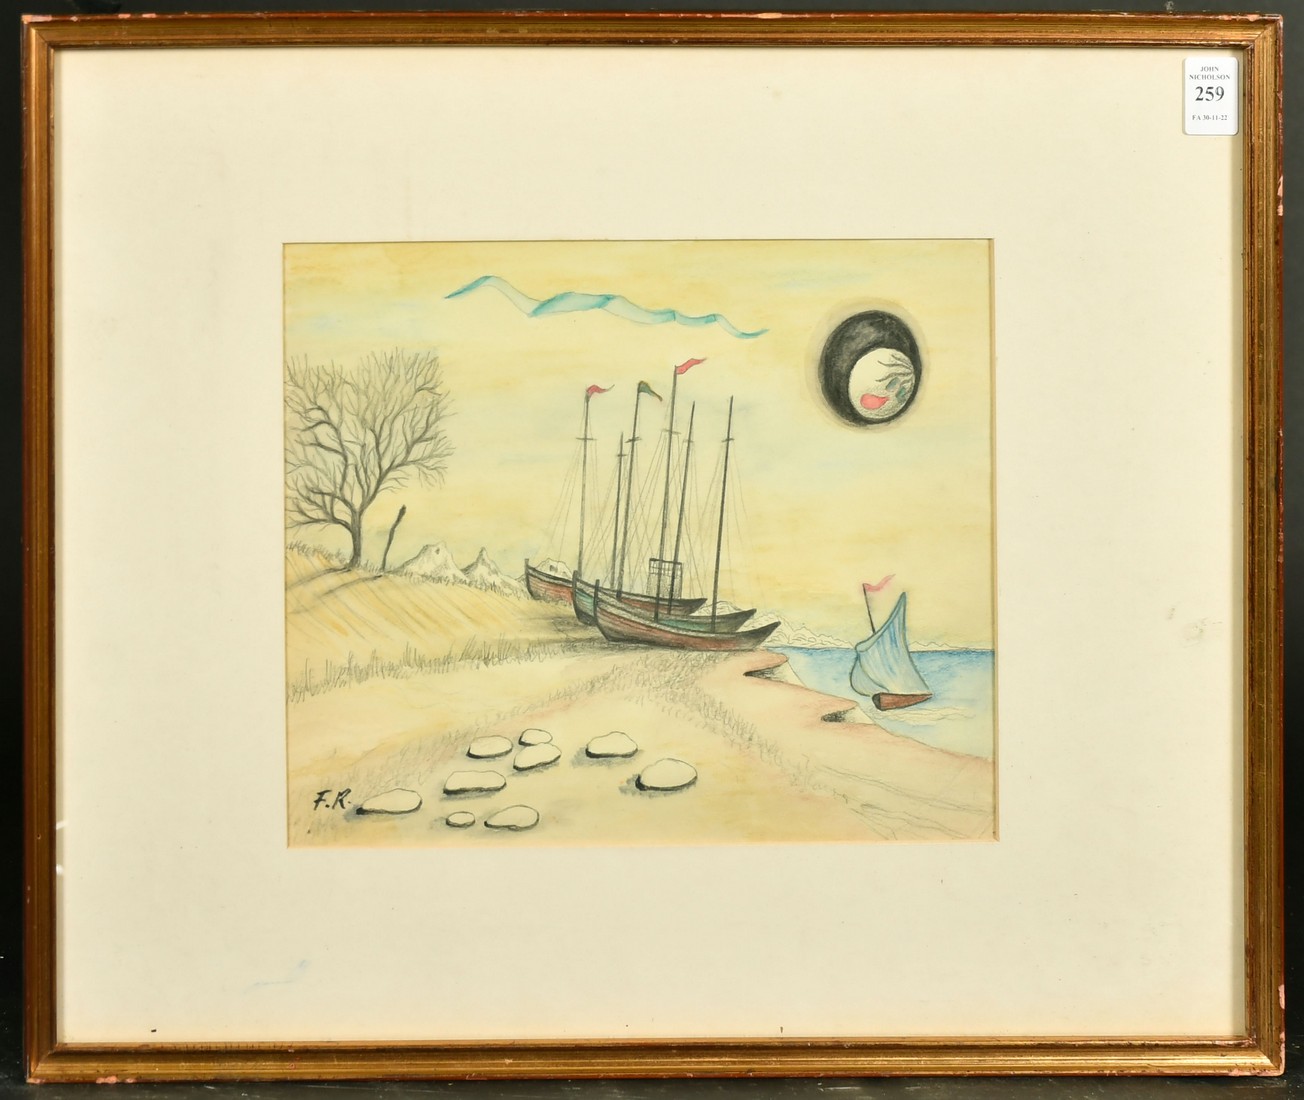 Mid-20th Century, Sailing boats on a beach, watercolour and gouache, initialled F.R, 9.5" x 11. - Image 2 of 4